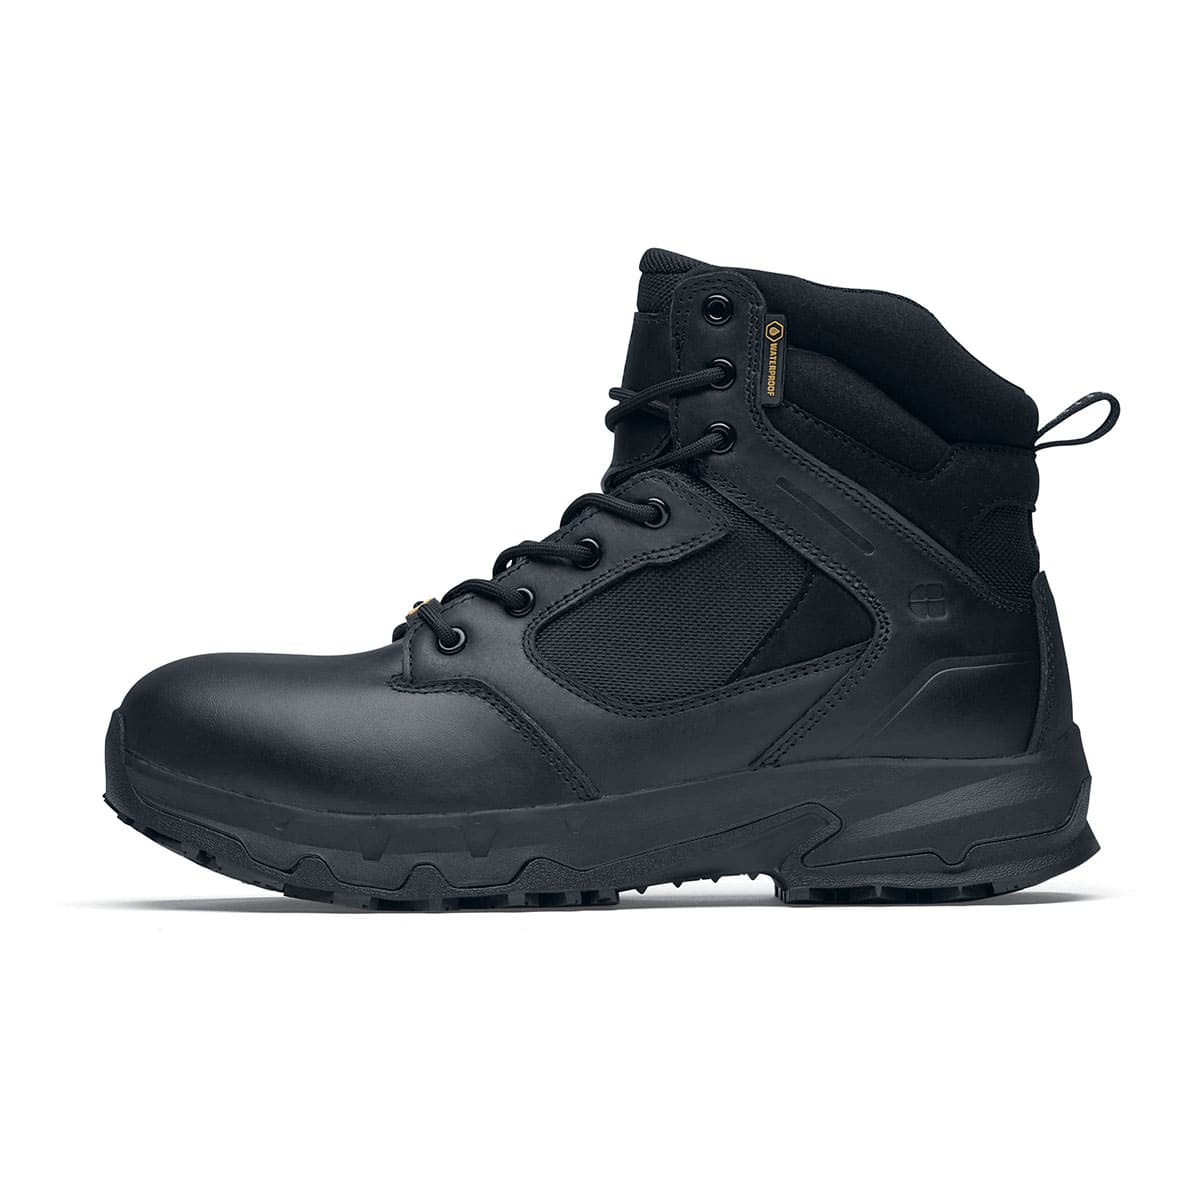 The Defence Mid from Shoes For Crews are waterproof, slip-resistant safety boots, seen from the left.